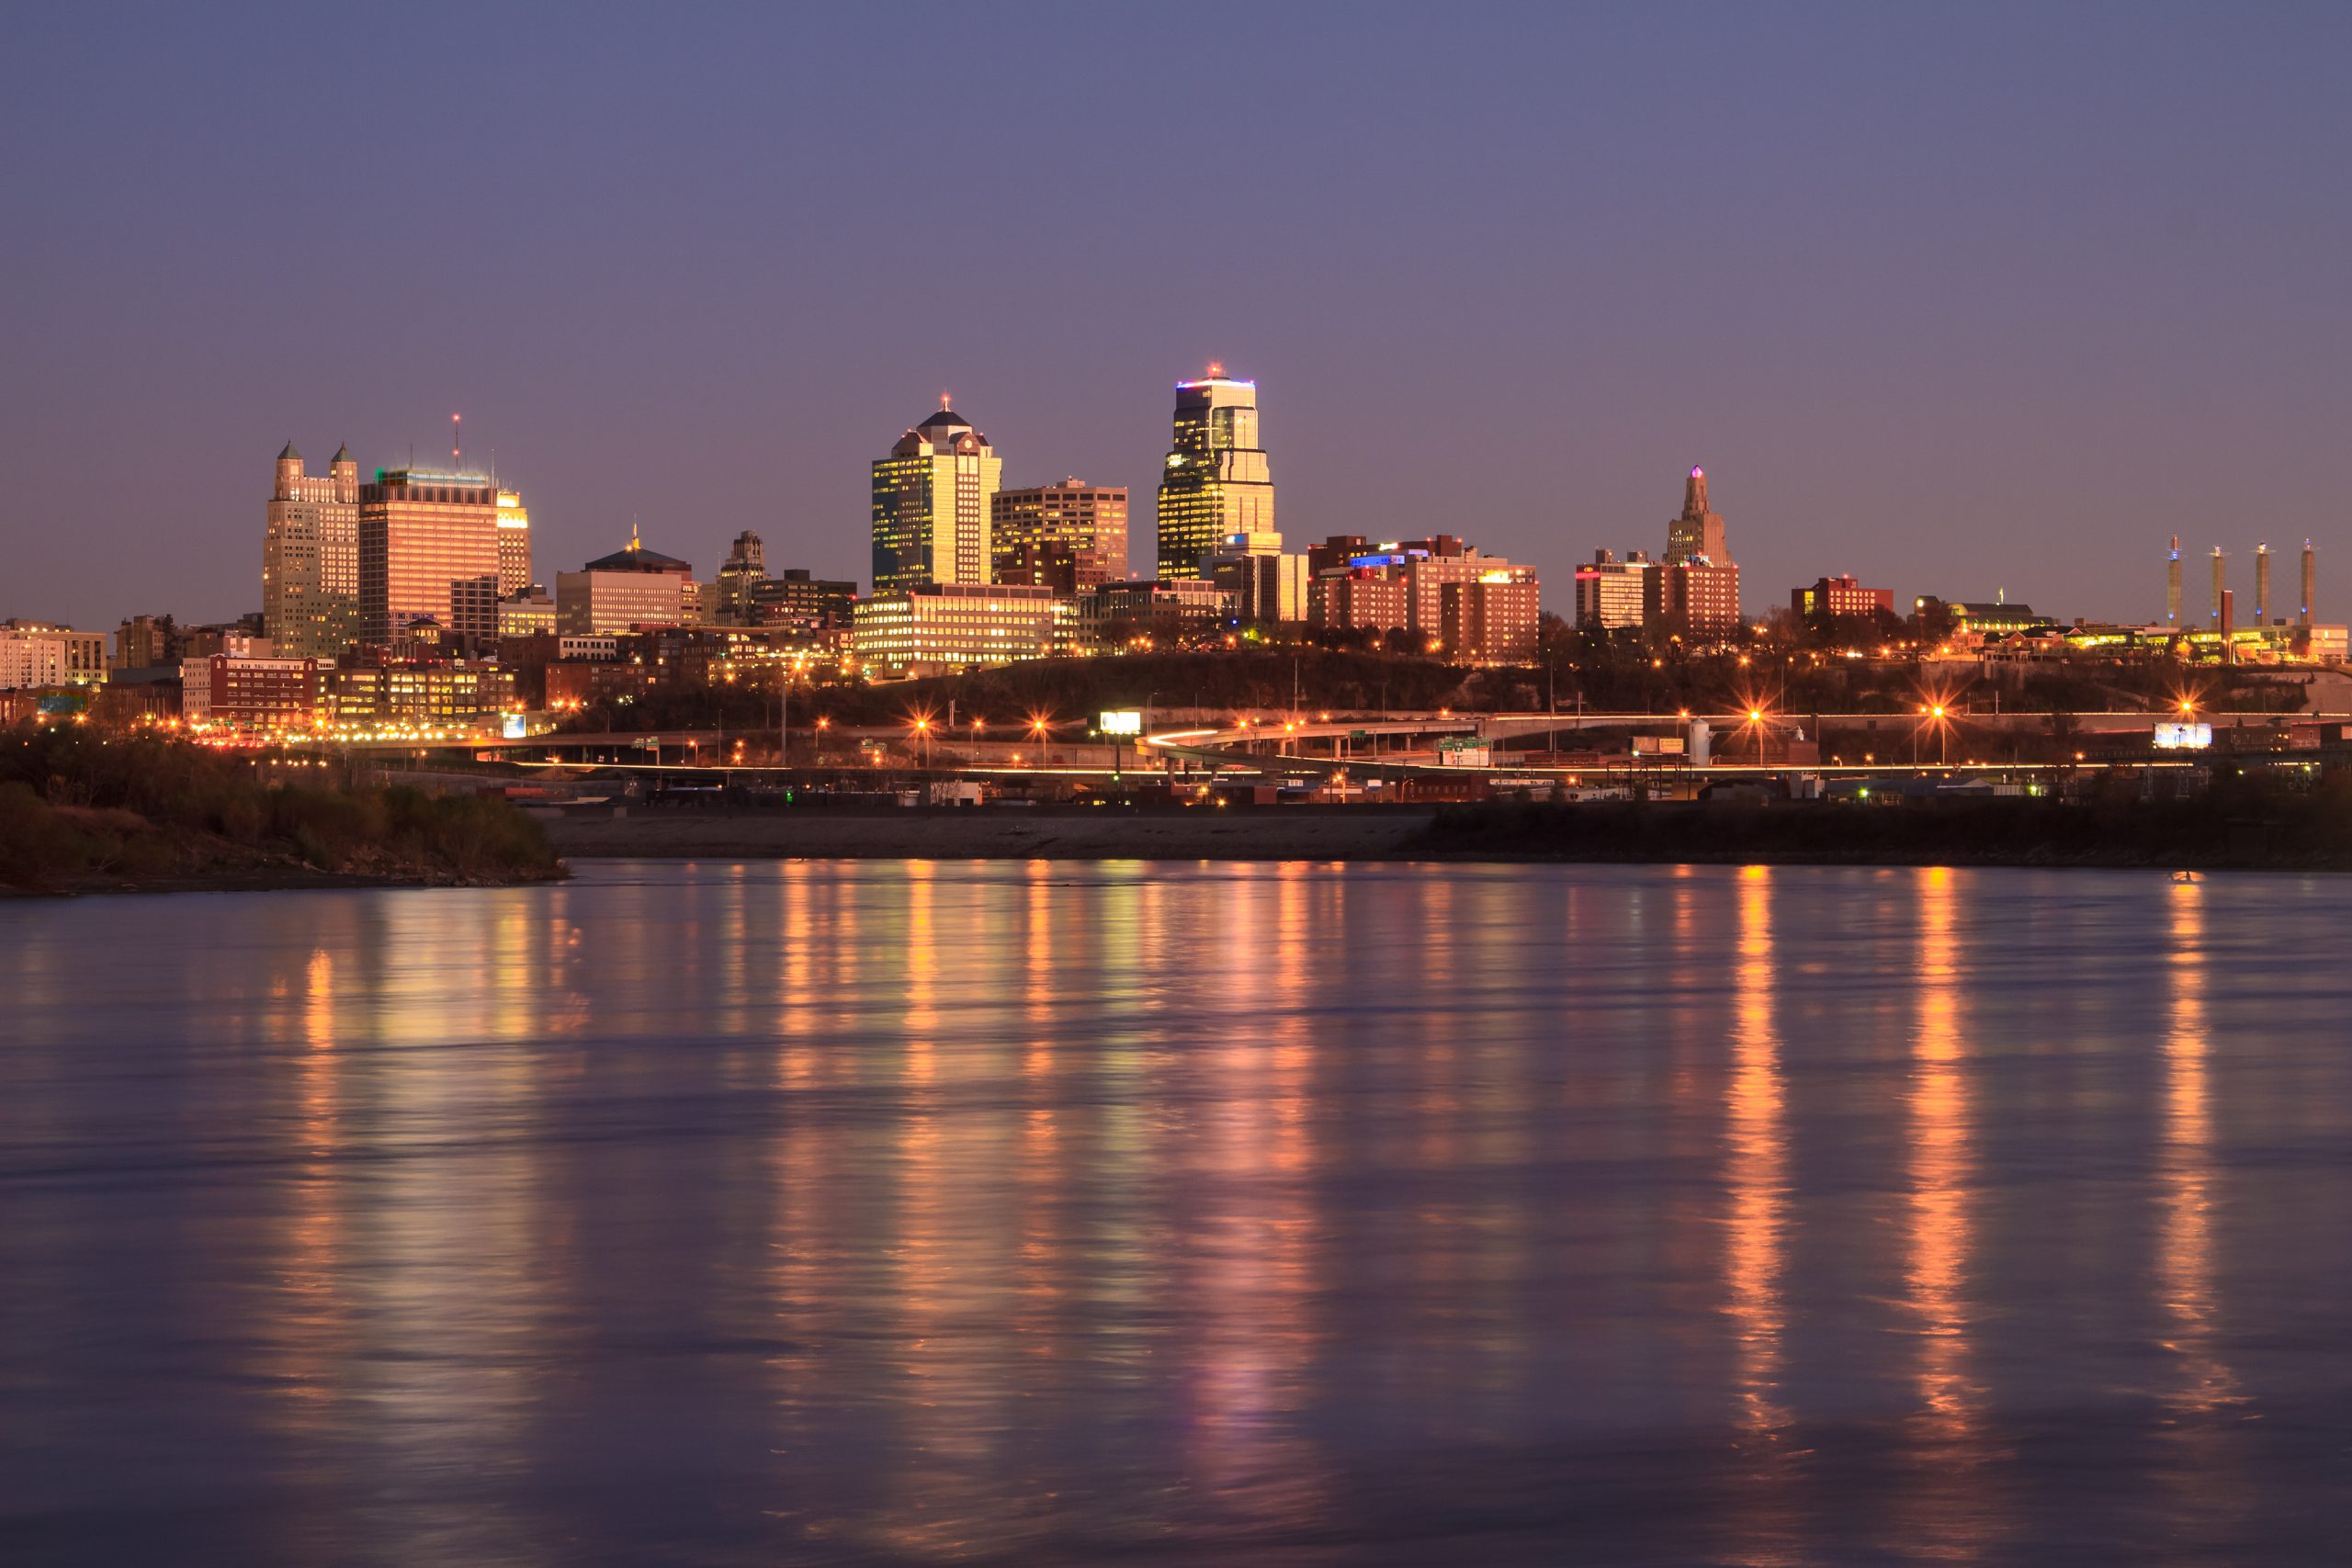 A view of the Kansas City skyline across the Missouri River downtown during Twilight